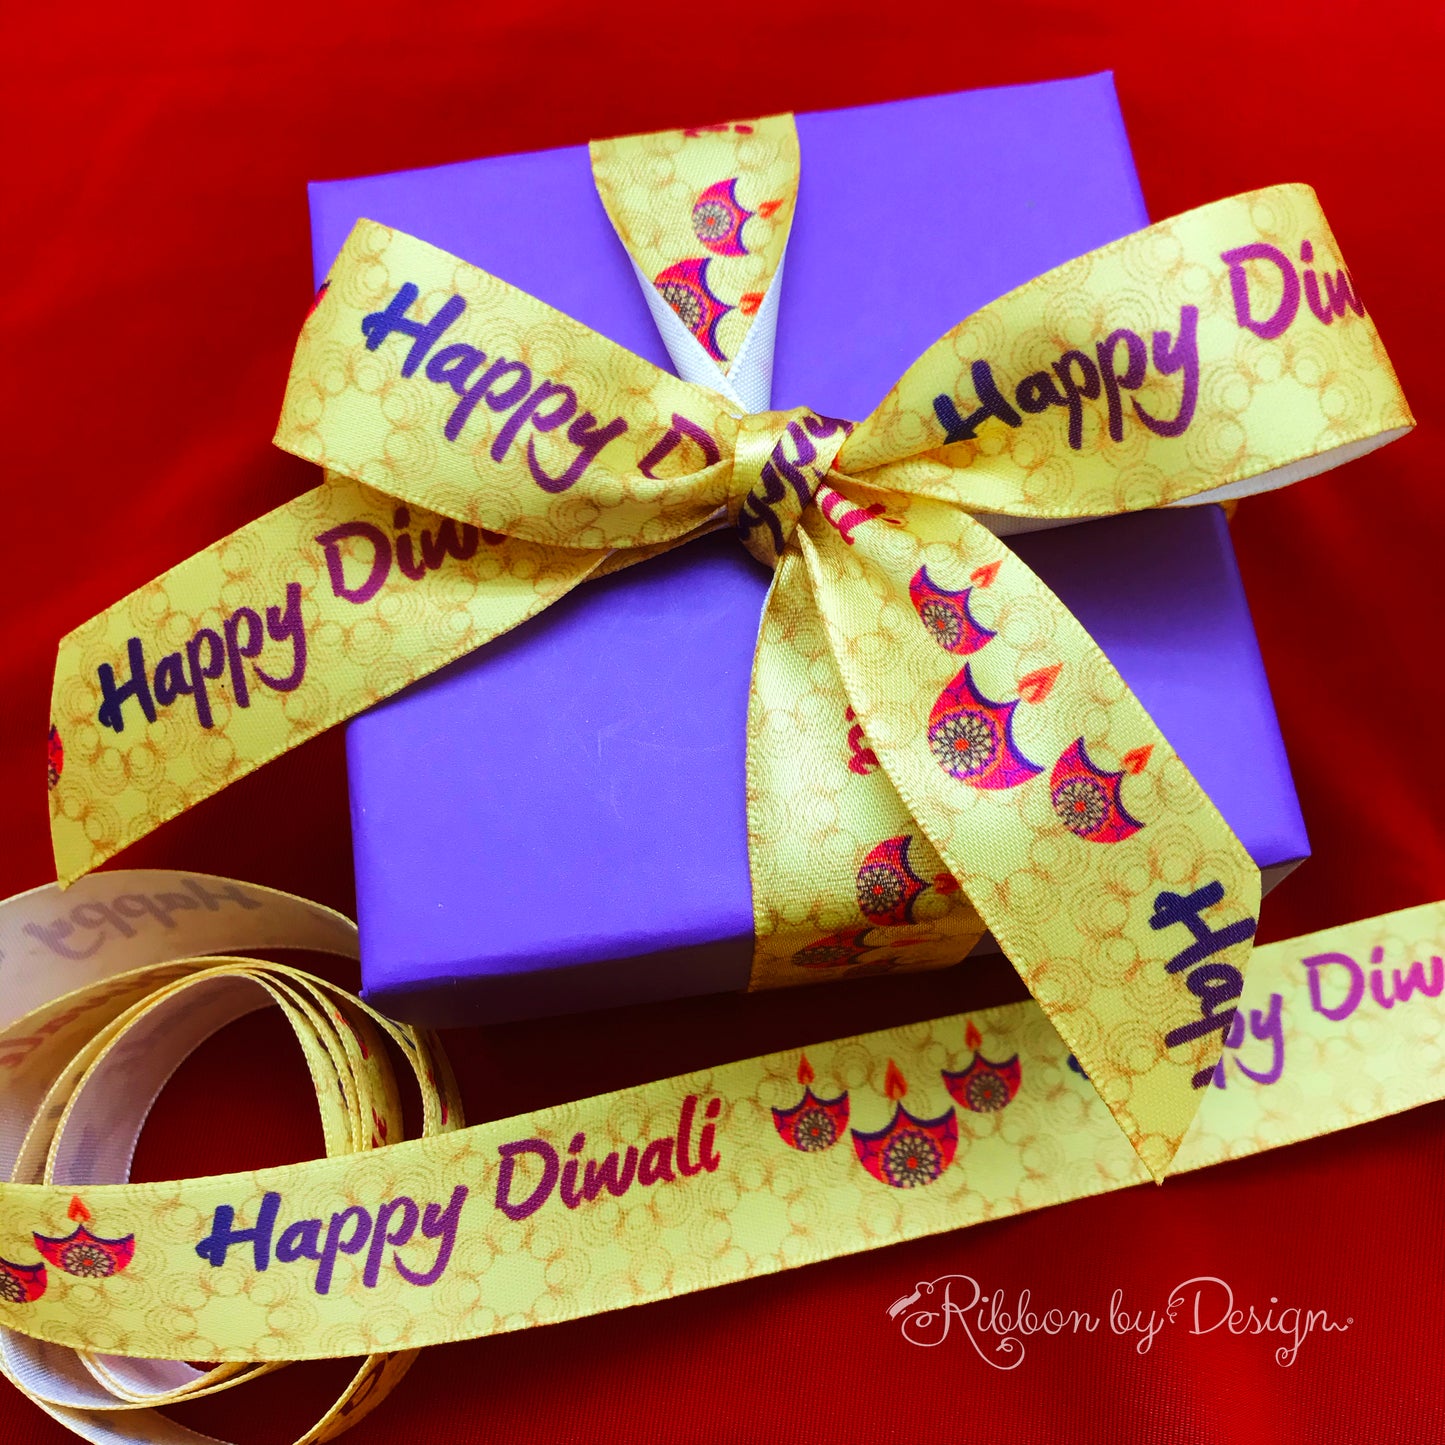 Happy Diwali ribbon with pink lamps on a yellow swirled background printed on7/8" white single face satin